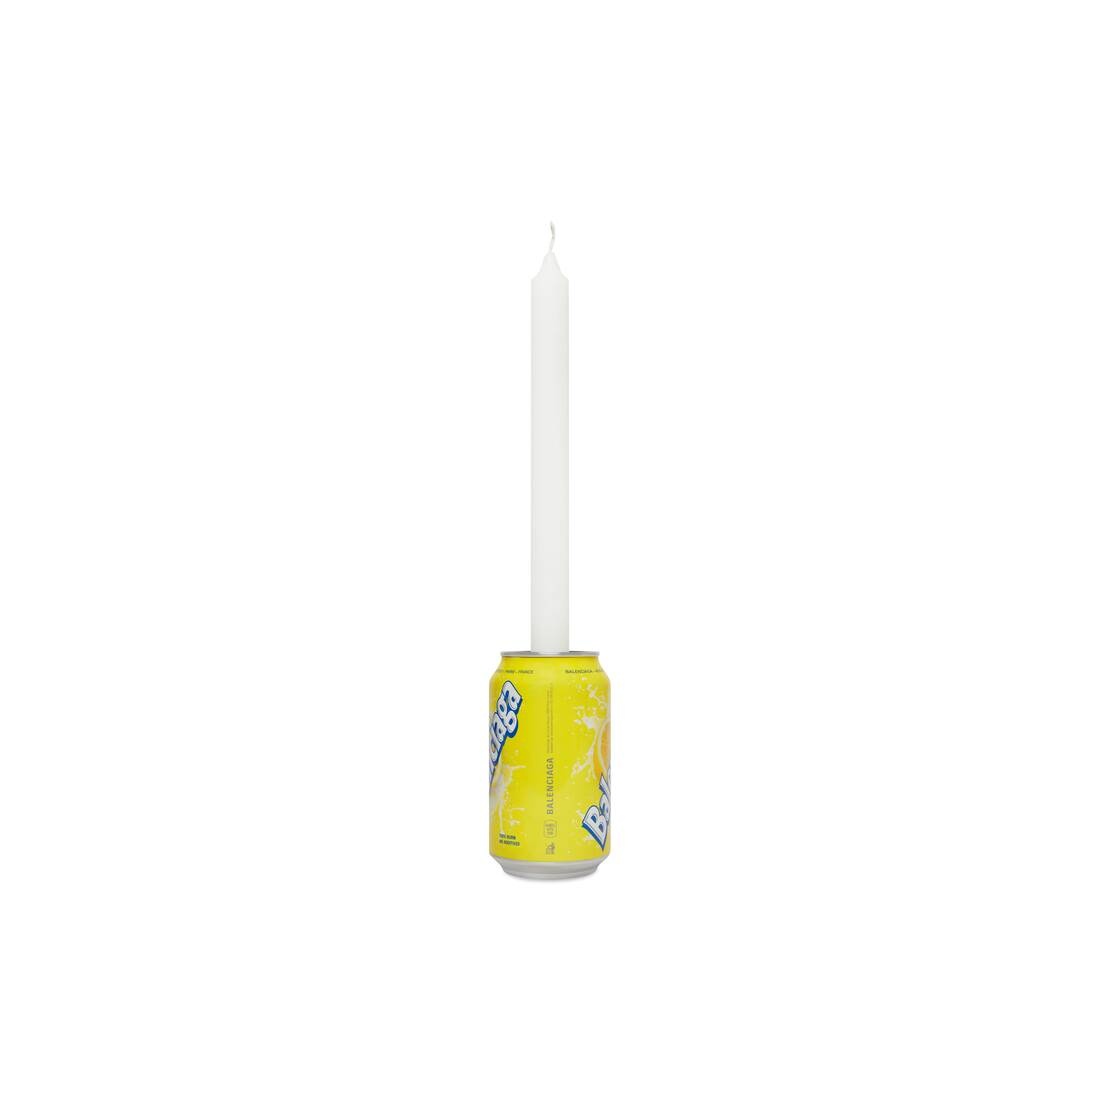 Candle Holder in Yellow - 3